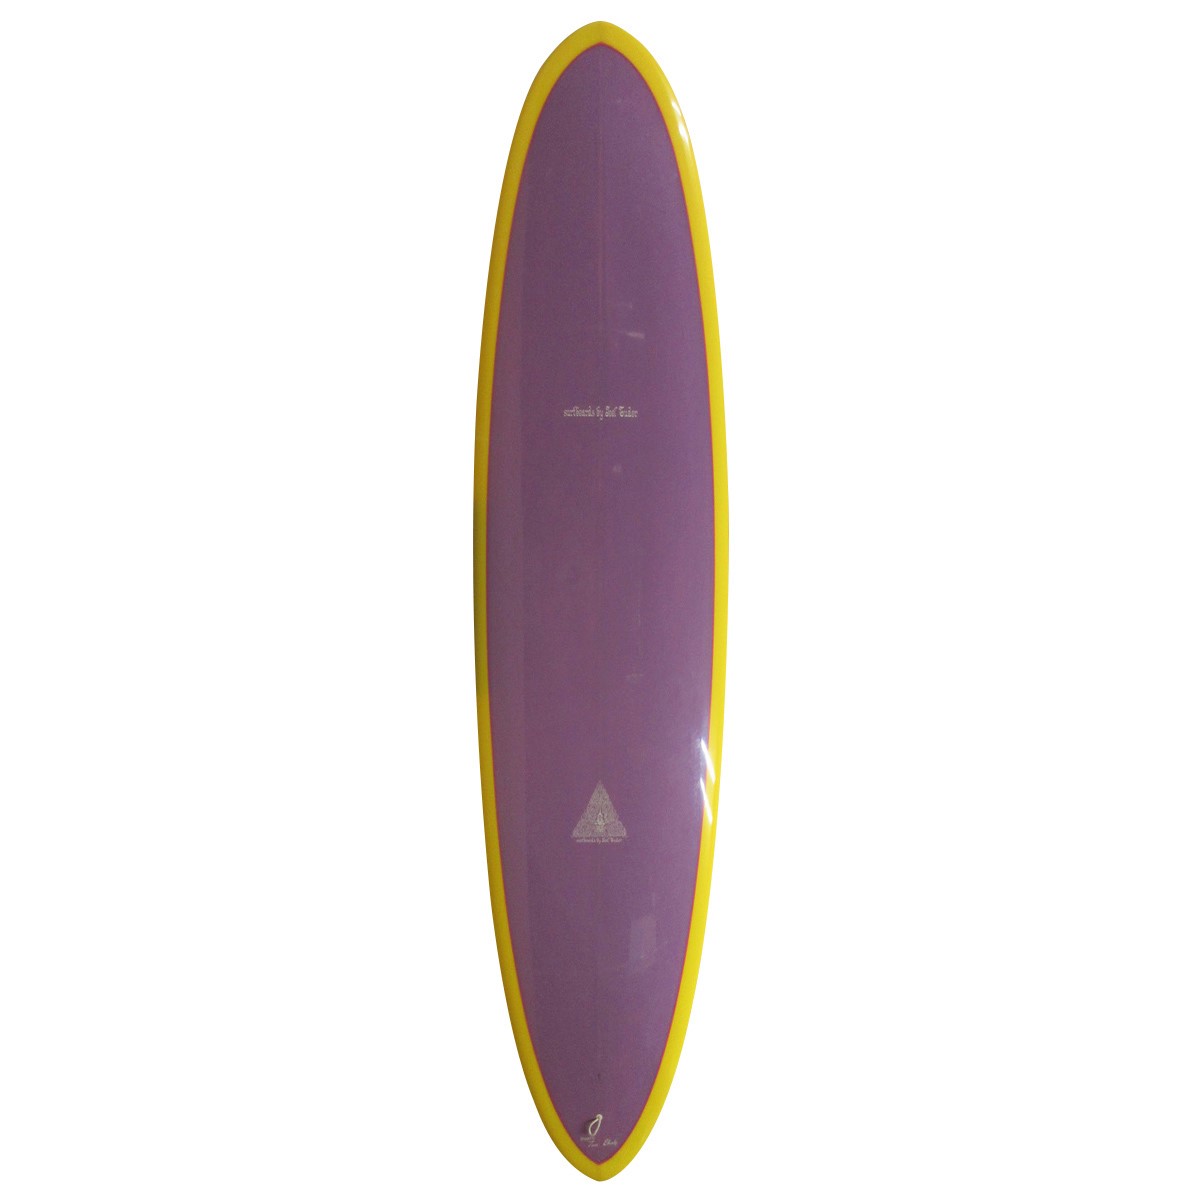 SURFBOARDS BY JOEL TUDOR / ROUND PIN EGG 7`11 Shaped by TOM EBERLY